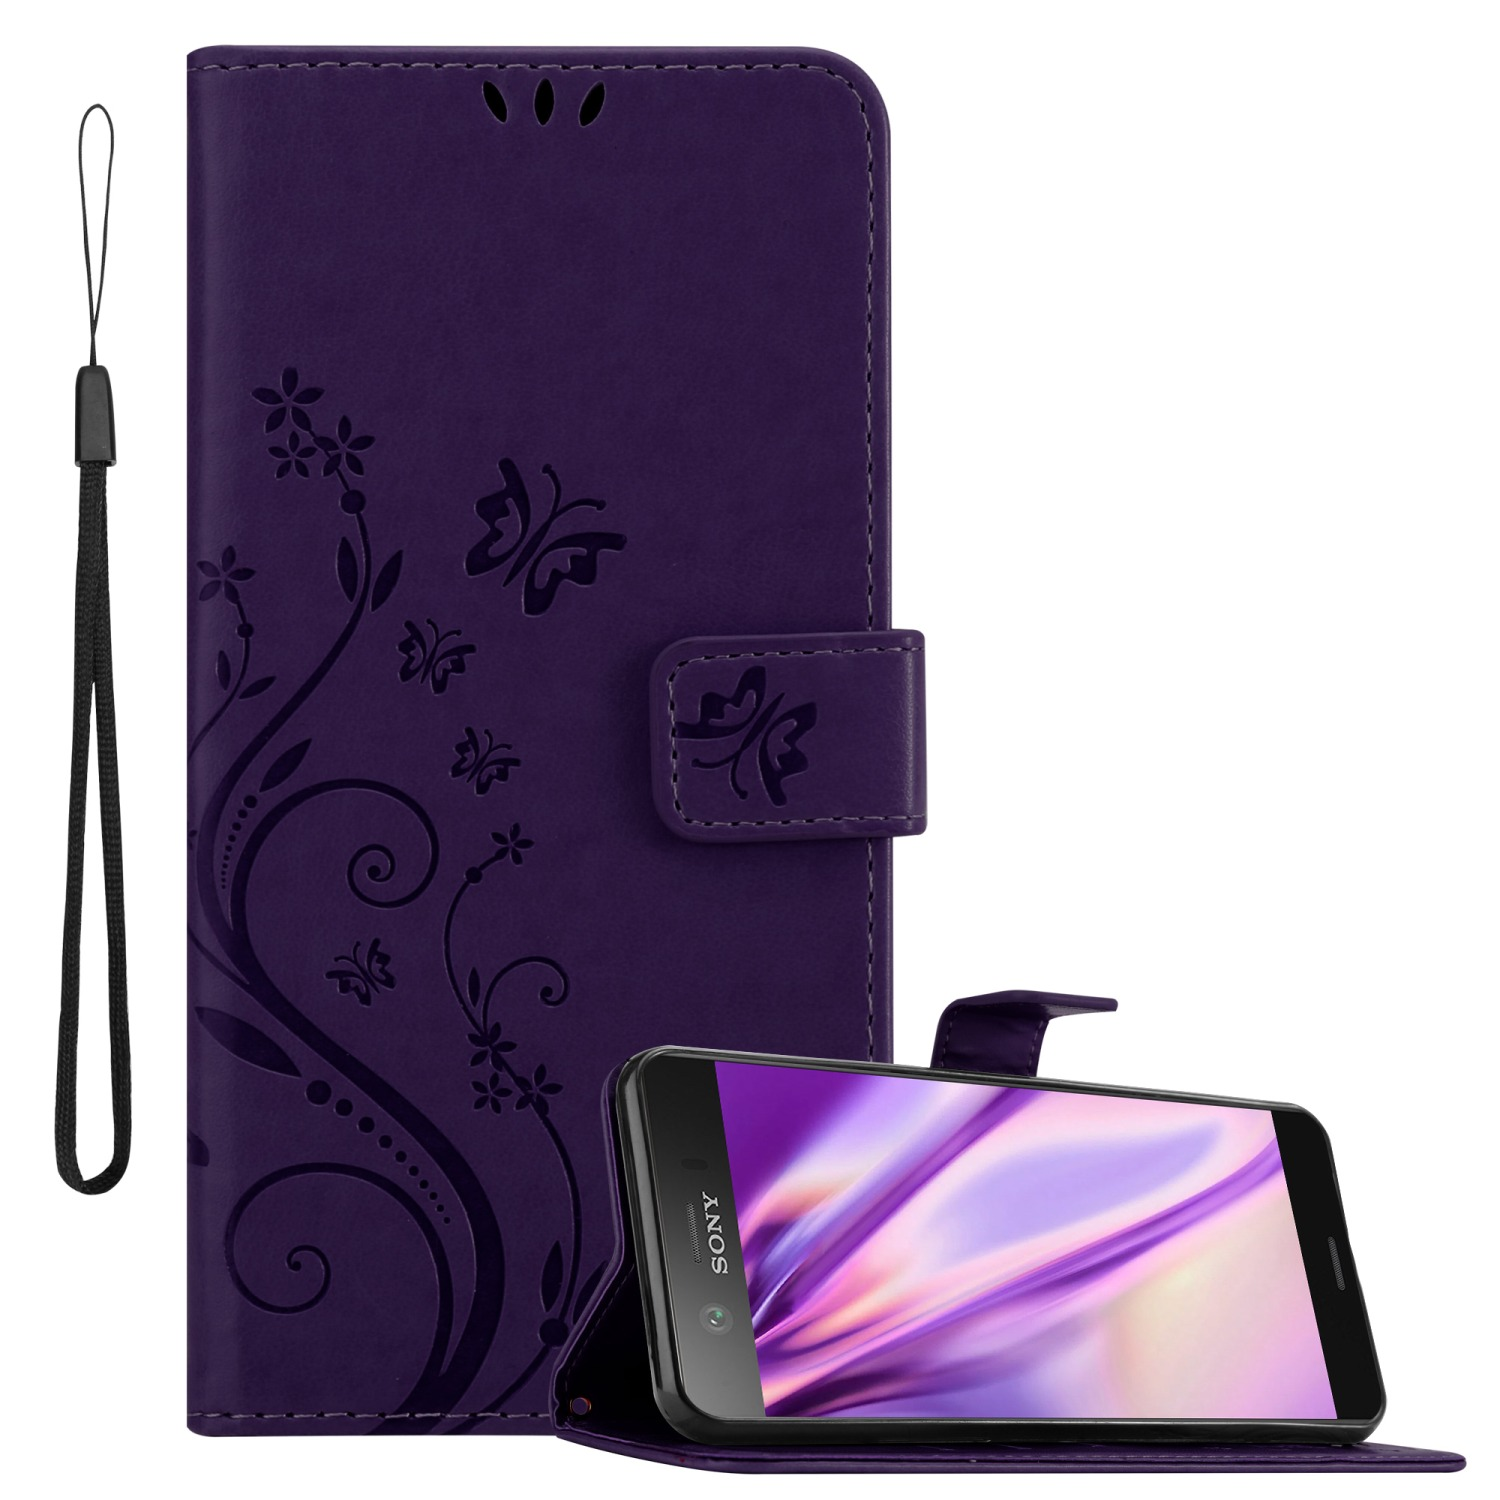 XZ1 Case, Hülle FLORAL LILA Sony, Muster Flower COMPACT, Xperia Bookcover, Blumen DUNKEL CADORABO